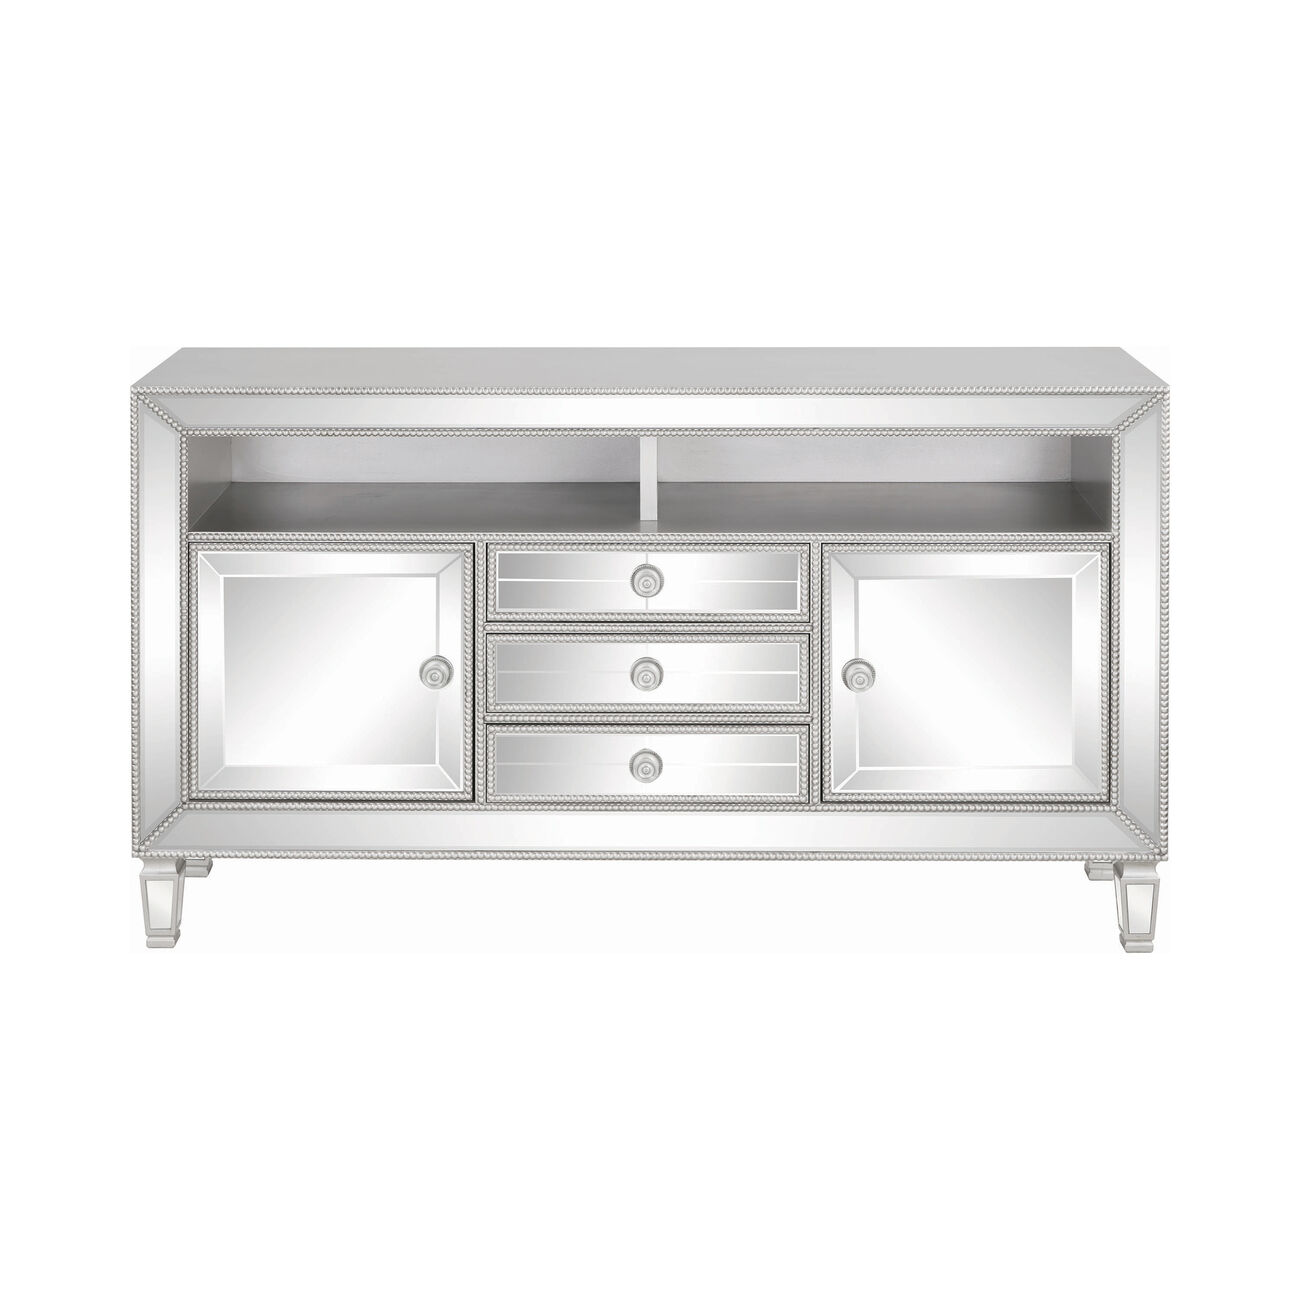 Contemporary Wood and Mirror TV Console with Beading Accents, Silver